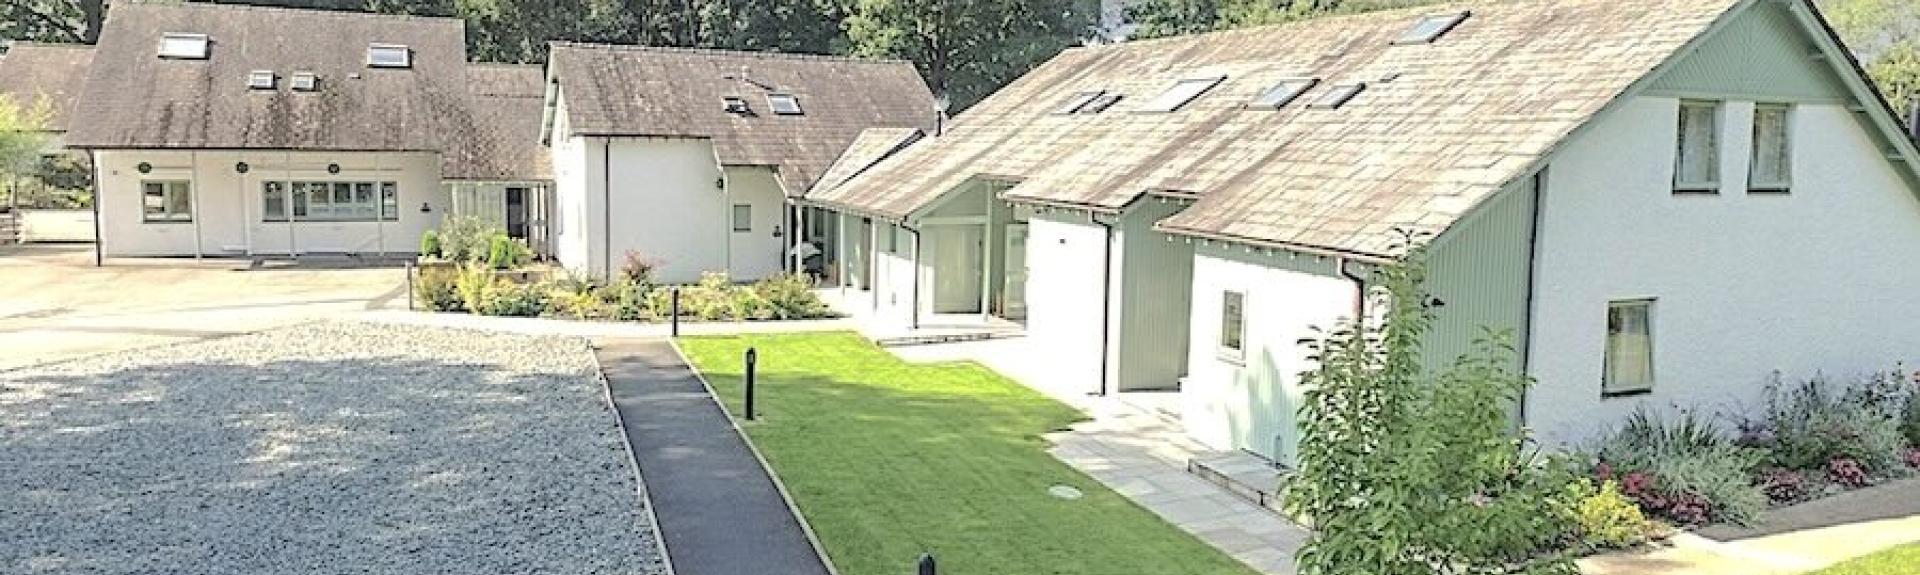 A chalet bungalow in Windermere overlooks a front lawn and a large parking area.